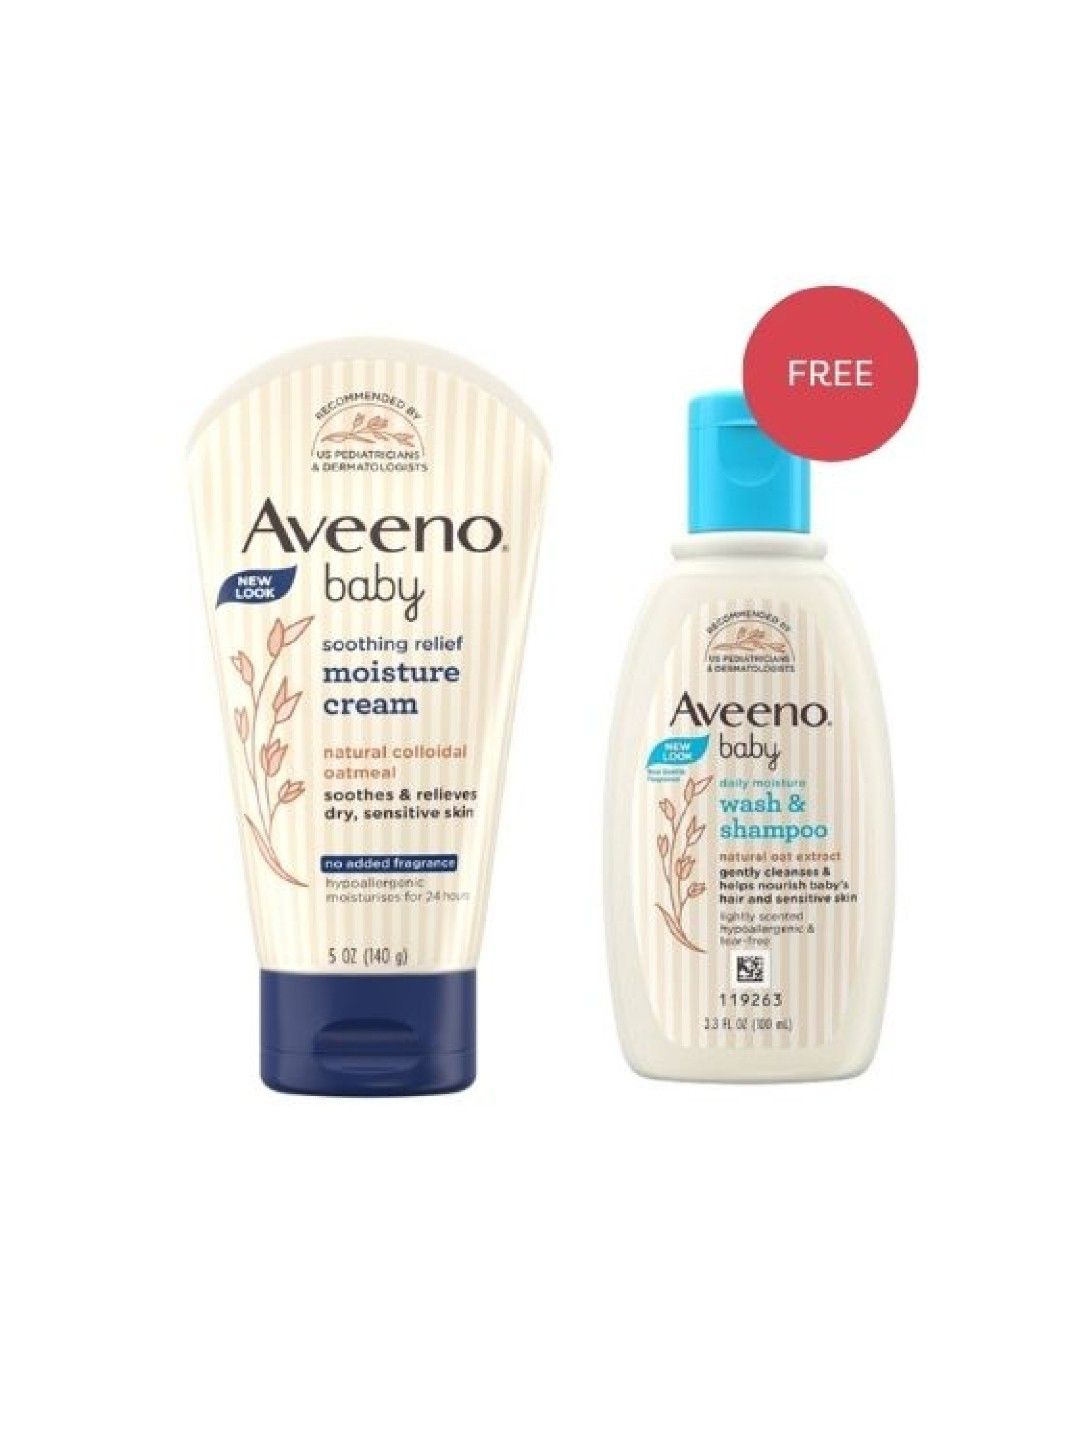 Aveeno Baby Soothing Relief Moisture Cream (140g) with FREE Baby Wash & Shampoo (100ml)